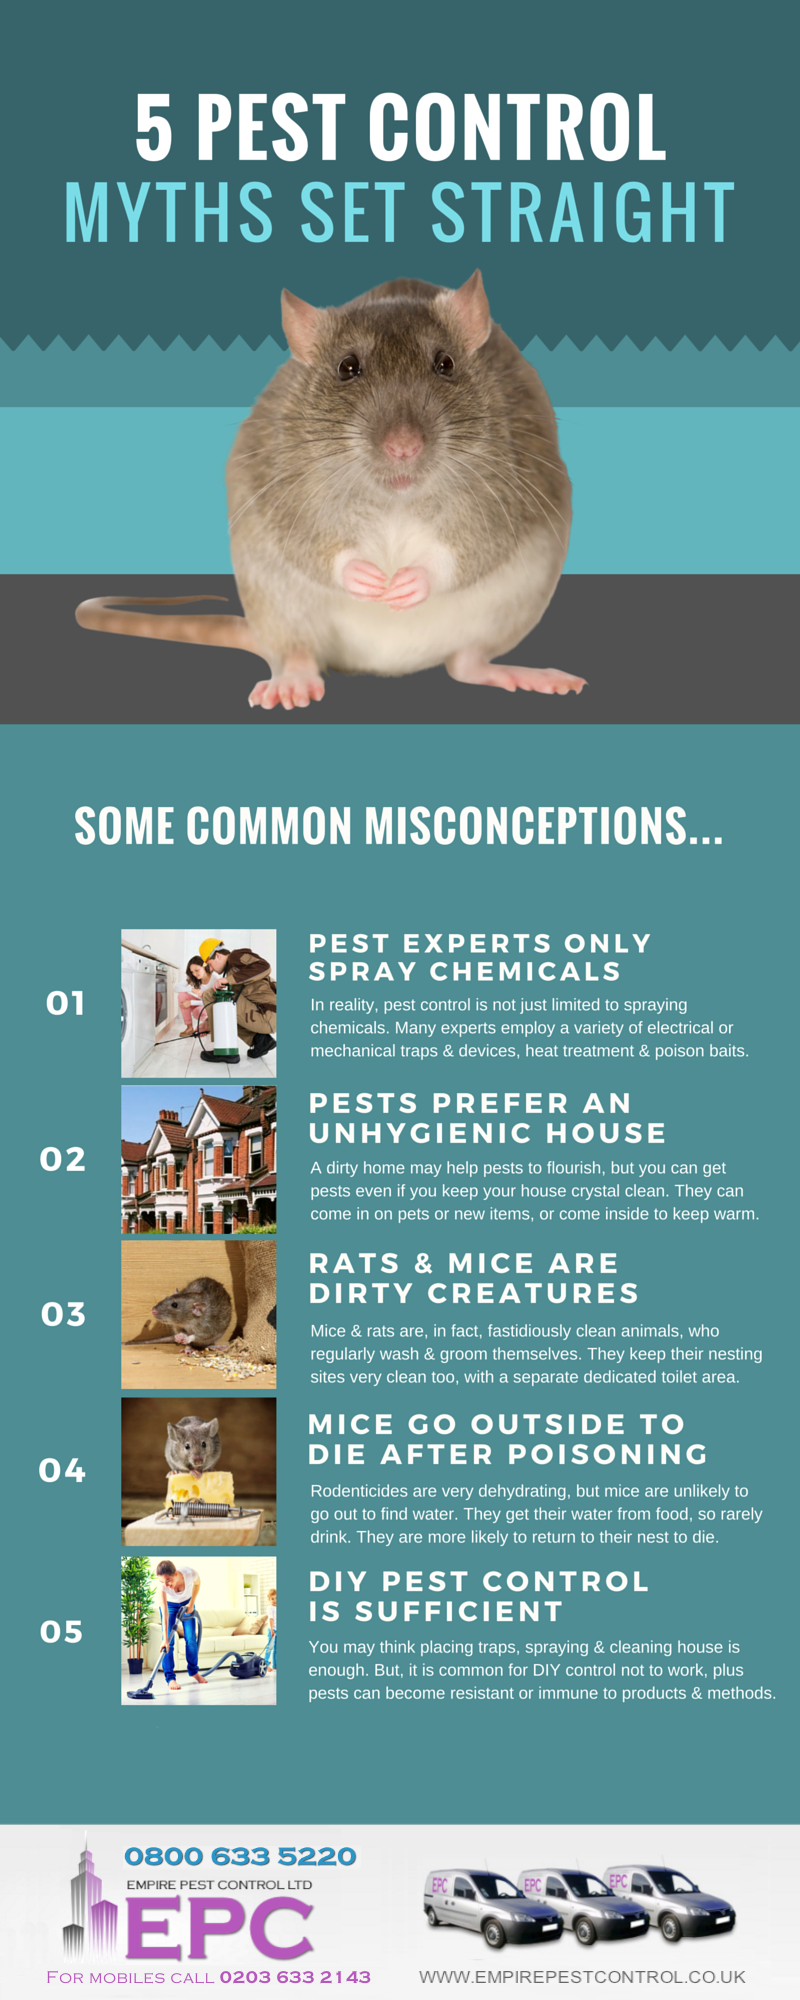 INFOGRAPHIC: Top 5 Pest Control Myths Set Straight